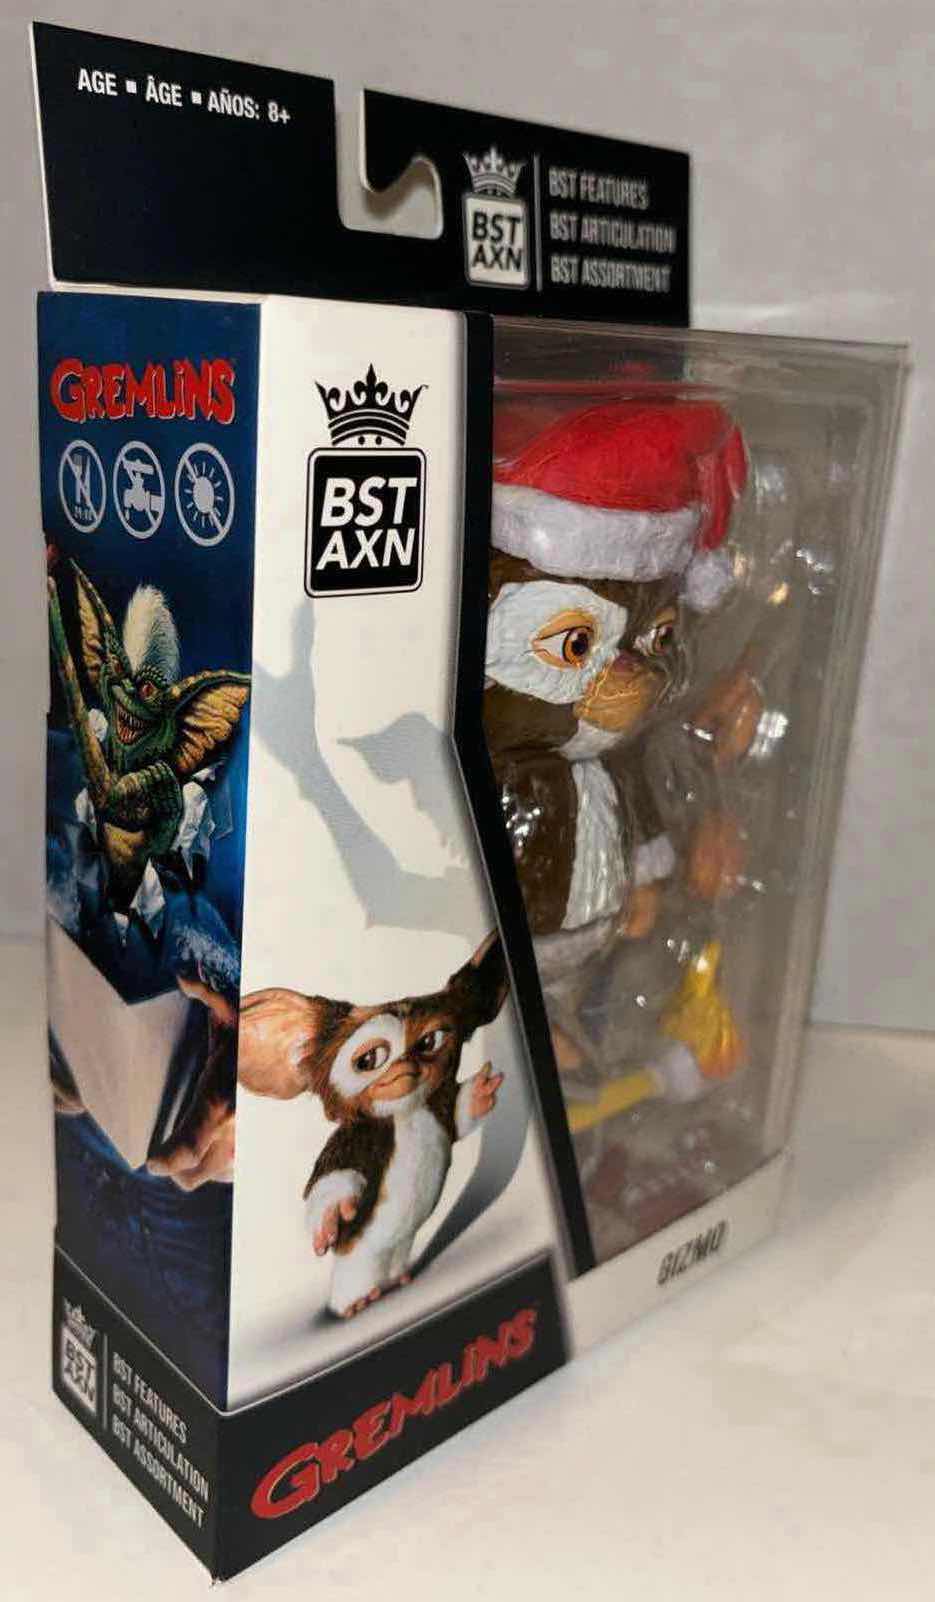 Photo 5 of NEW THE LOYAL SUBJECTS BST AXN ACTION FIGURE, GREMLINS “GIZMO”